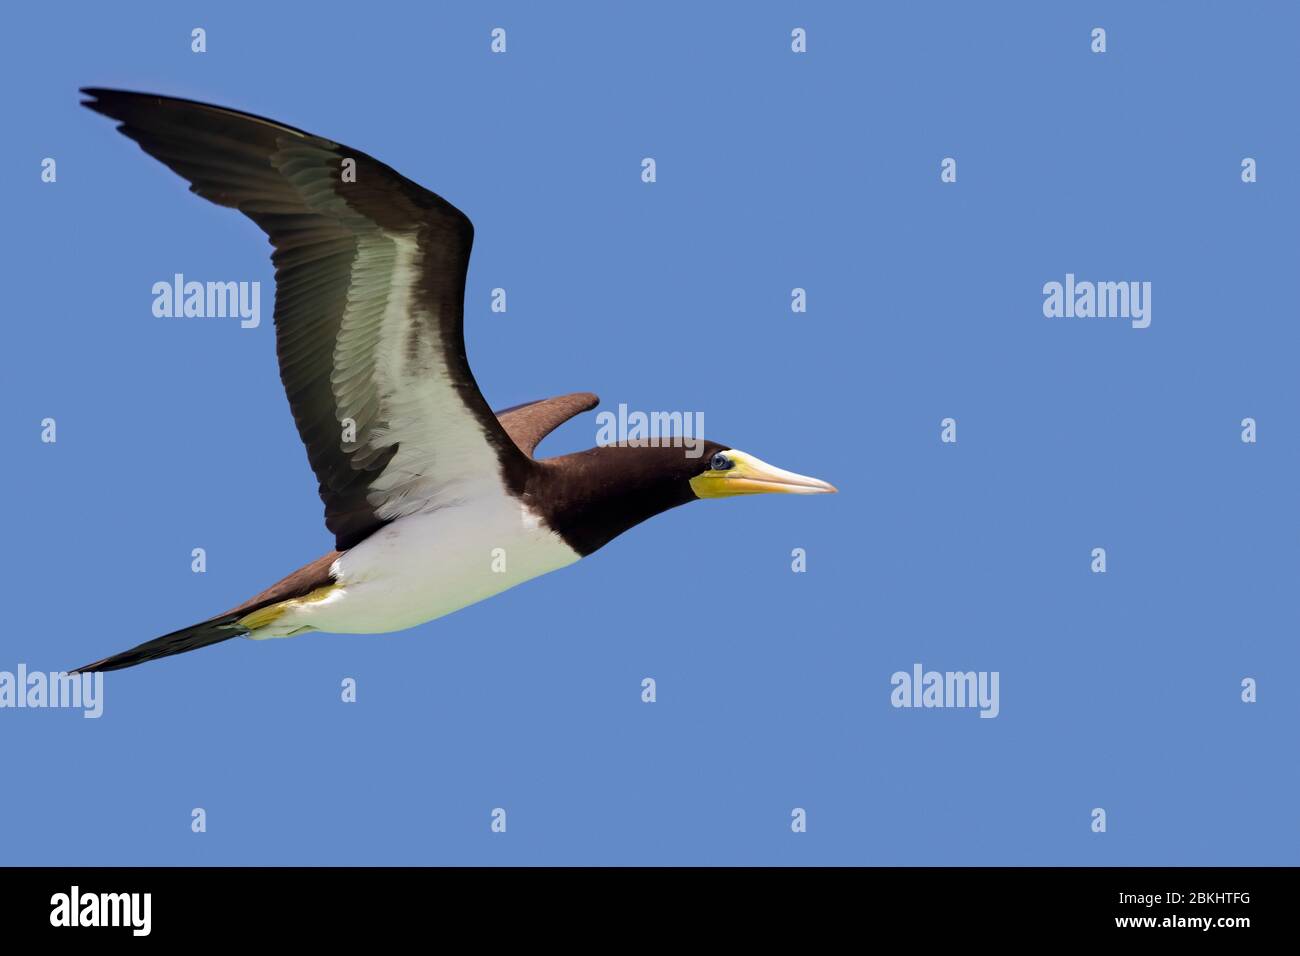 Brown booby (Sula leucogaster) in flight against blue sky Stock Photo